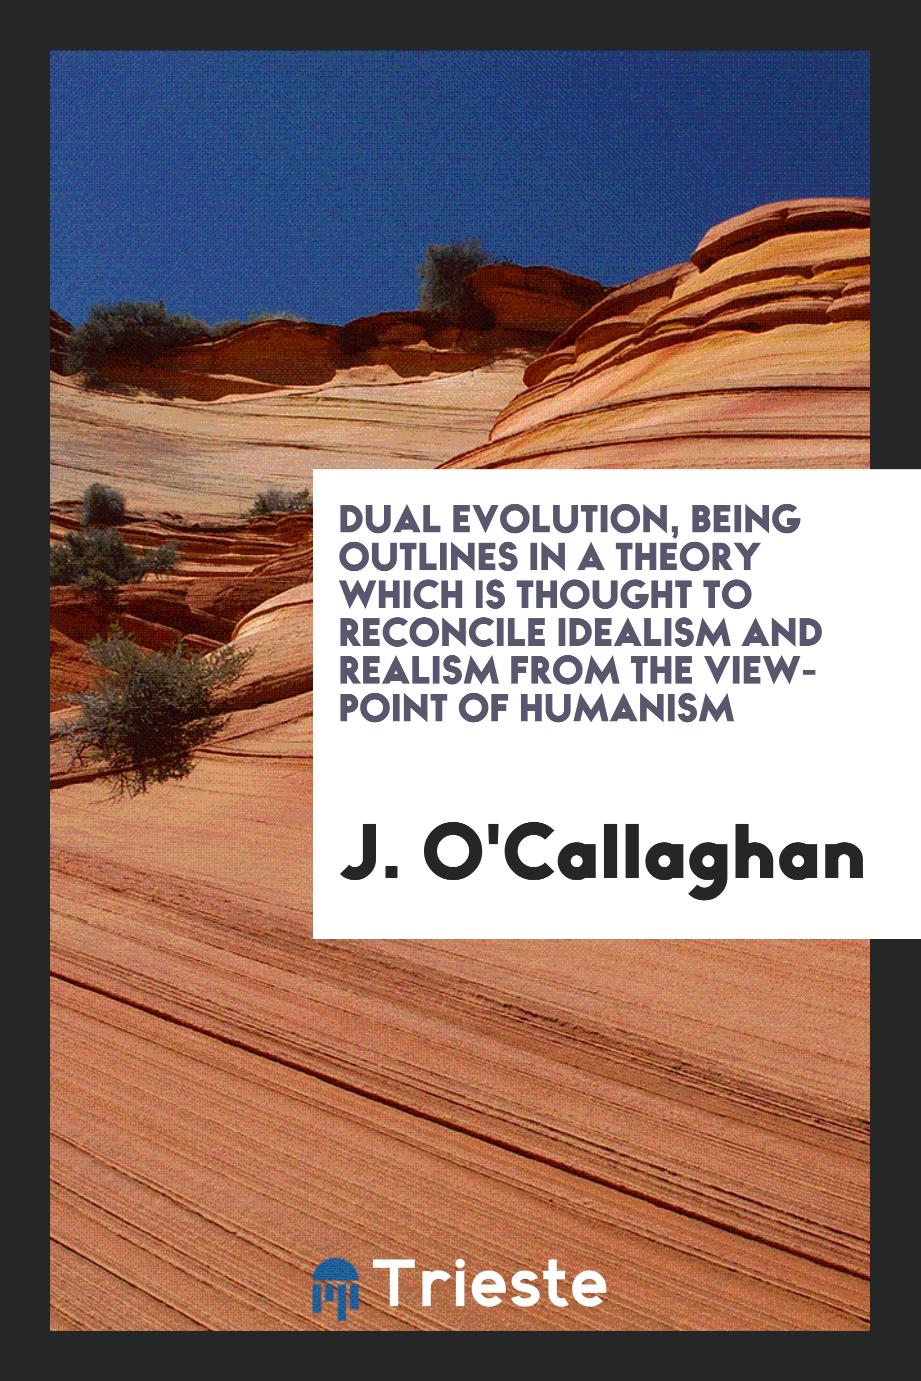 Dual evolution, being outlines in a theory which is thought to reconcile idealism and realism from the view-point of humanism